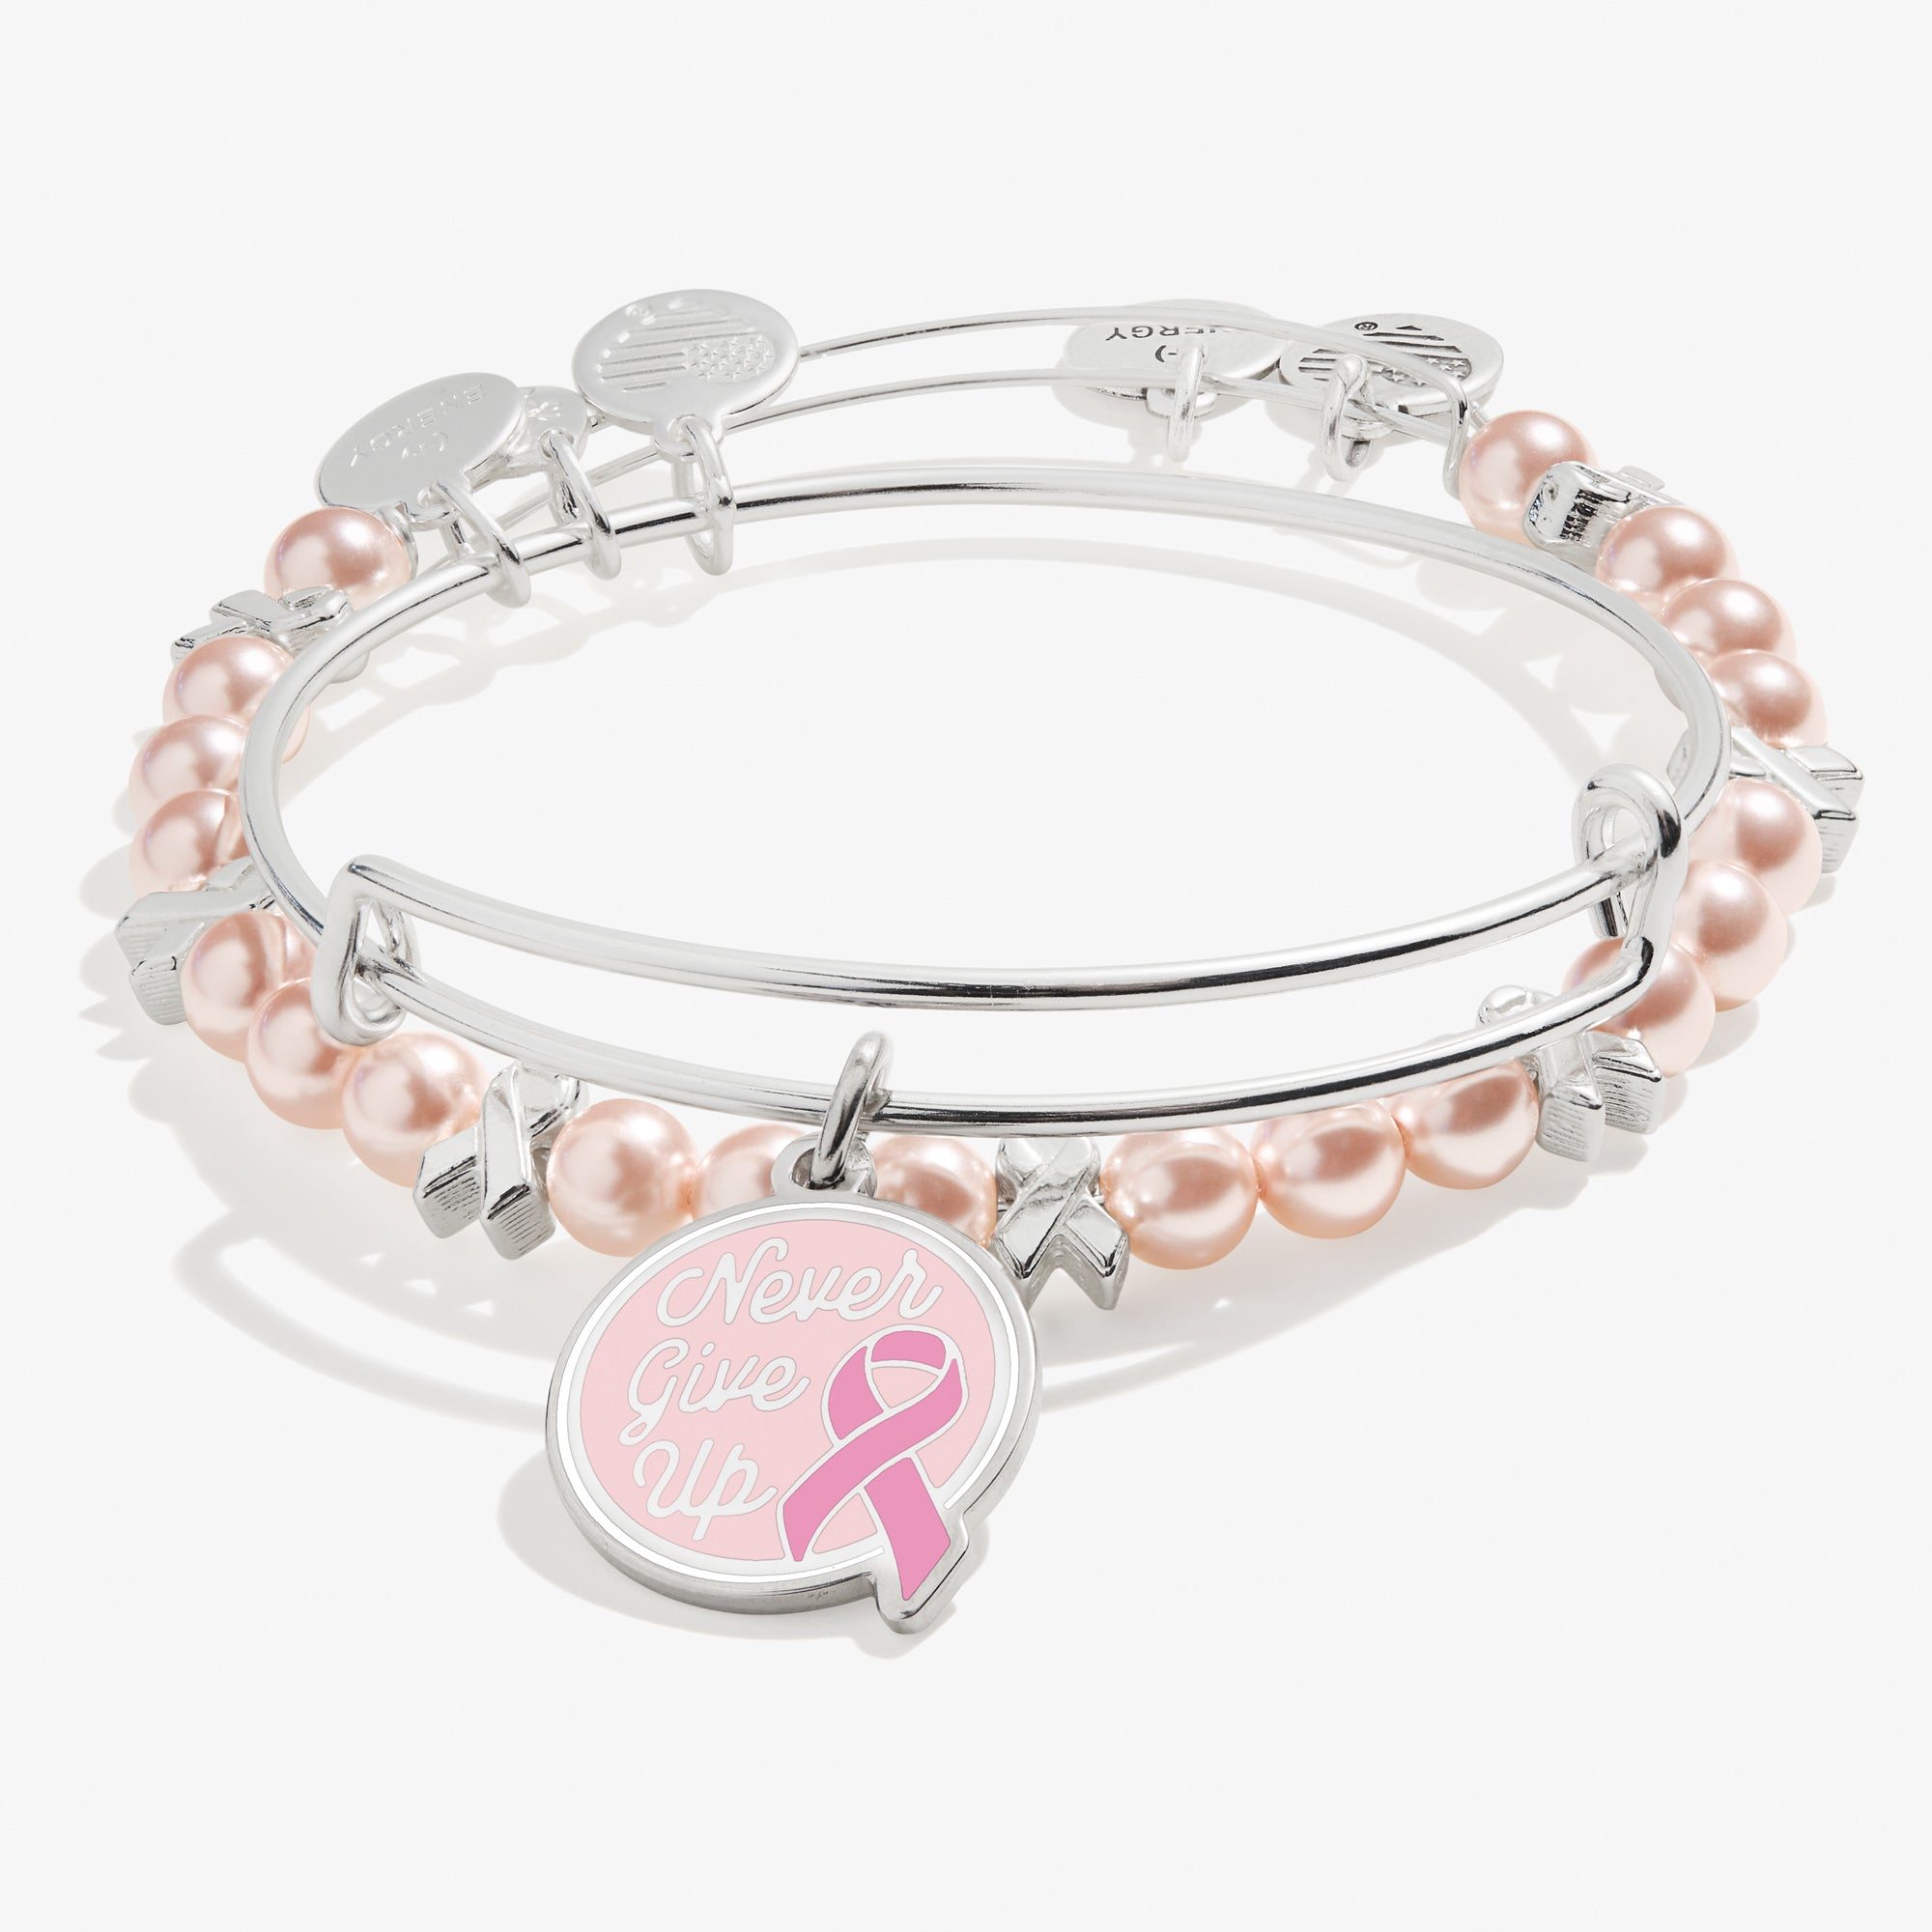 'Never Give Up' Breast Cancer Awareness Charm Bangles, Set of 2